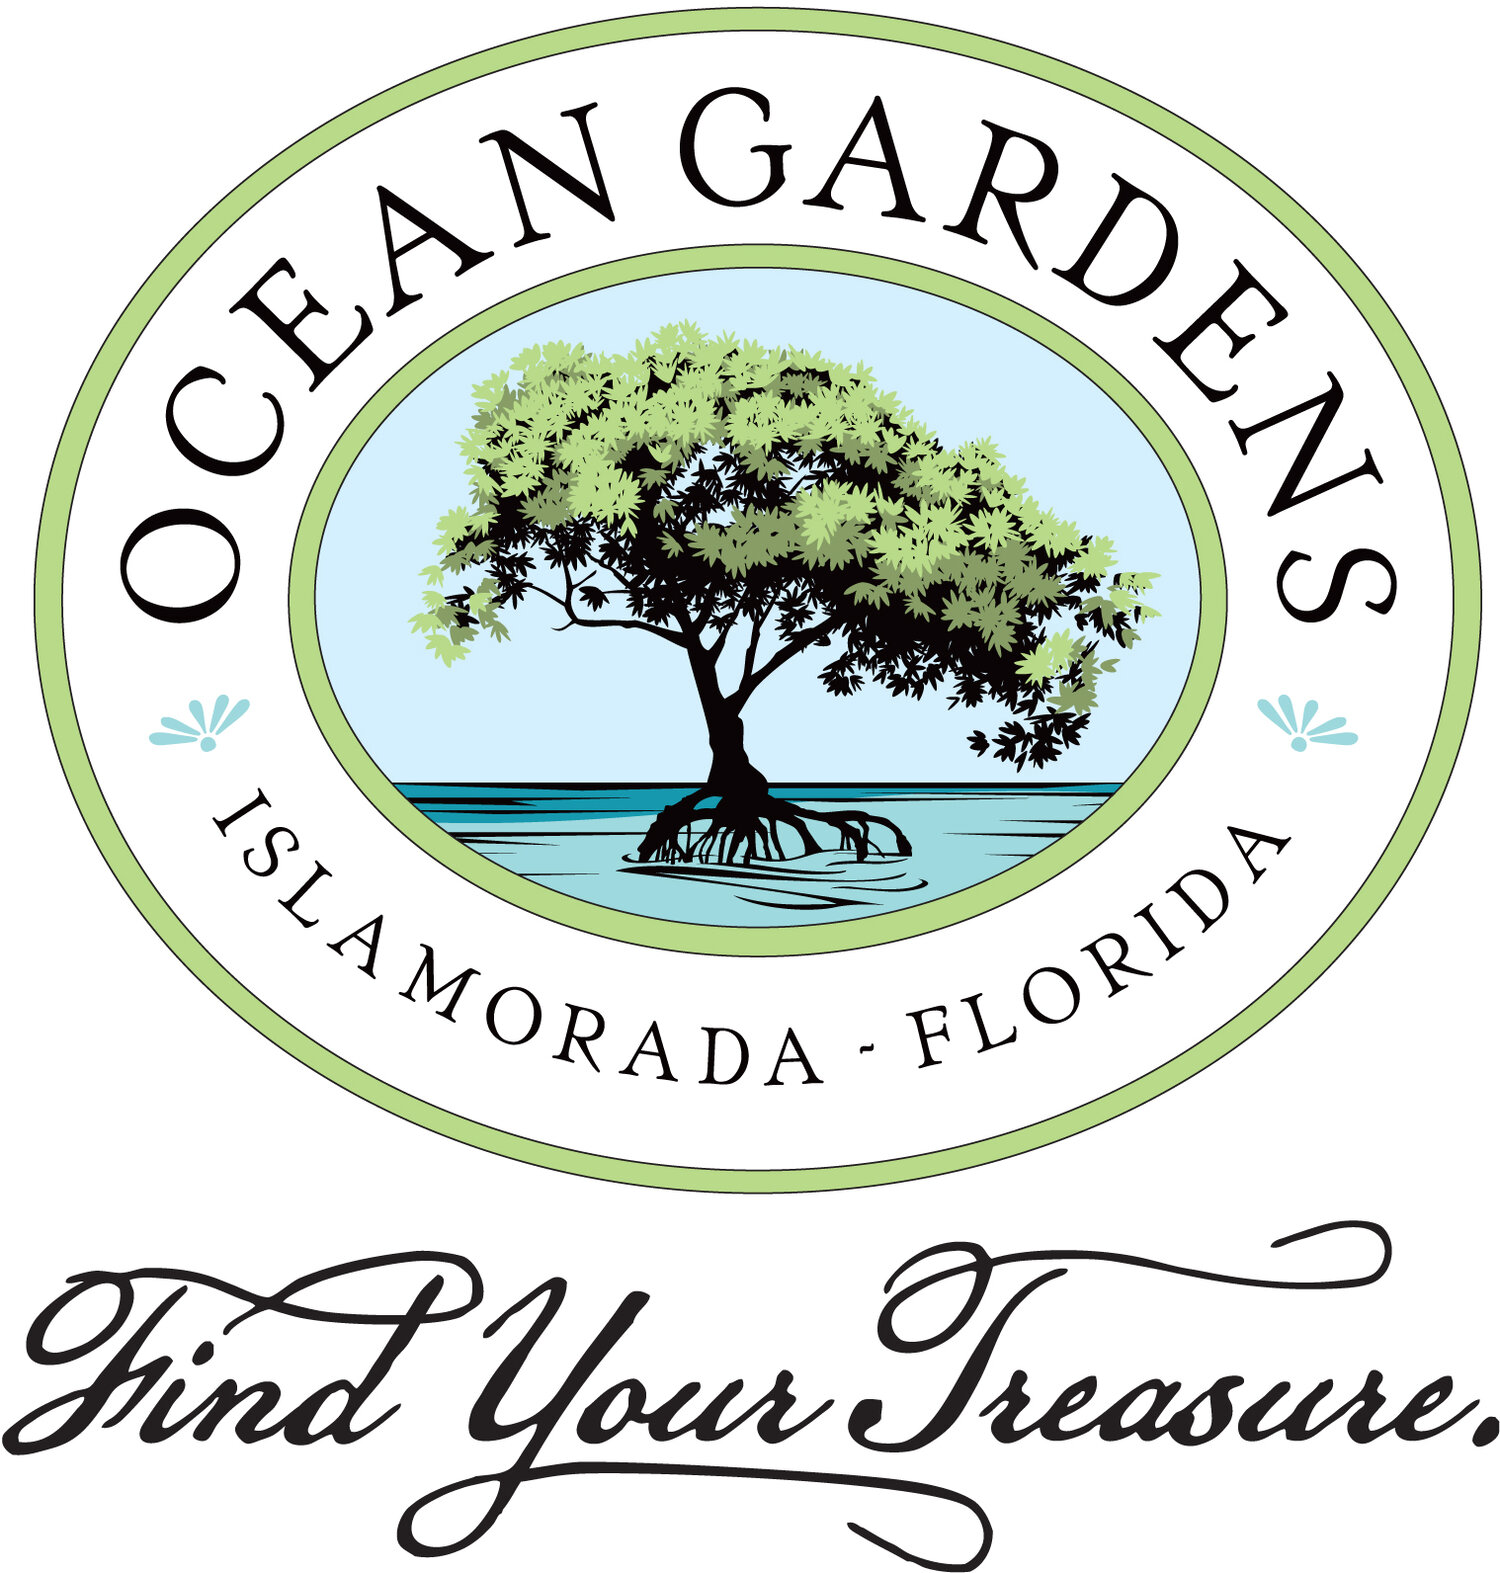 Ocean Gardens and Gifts